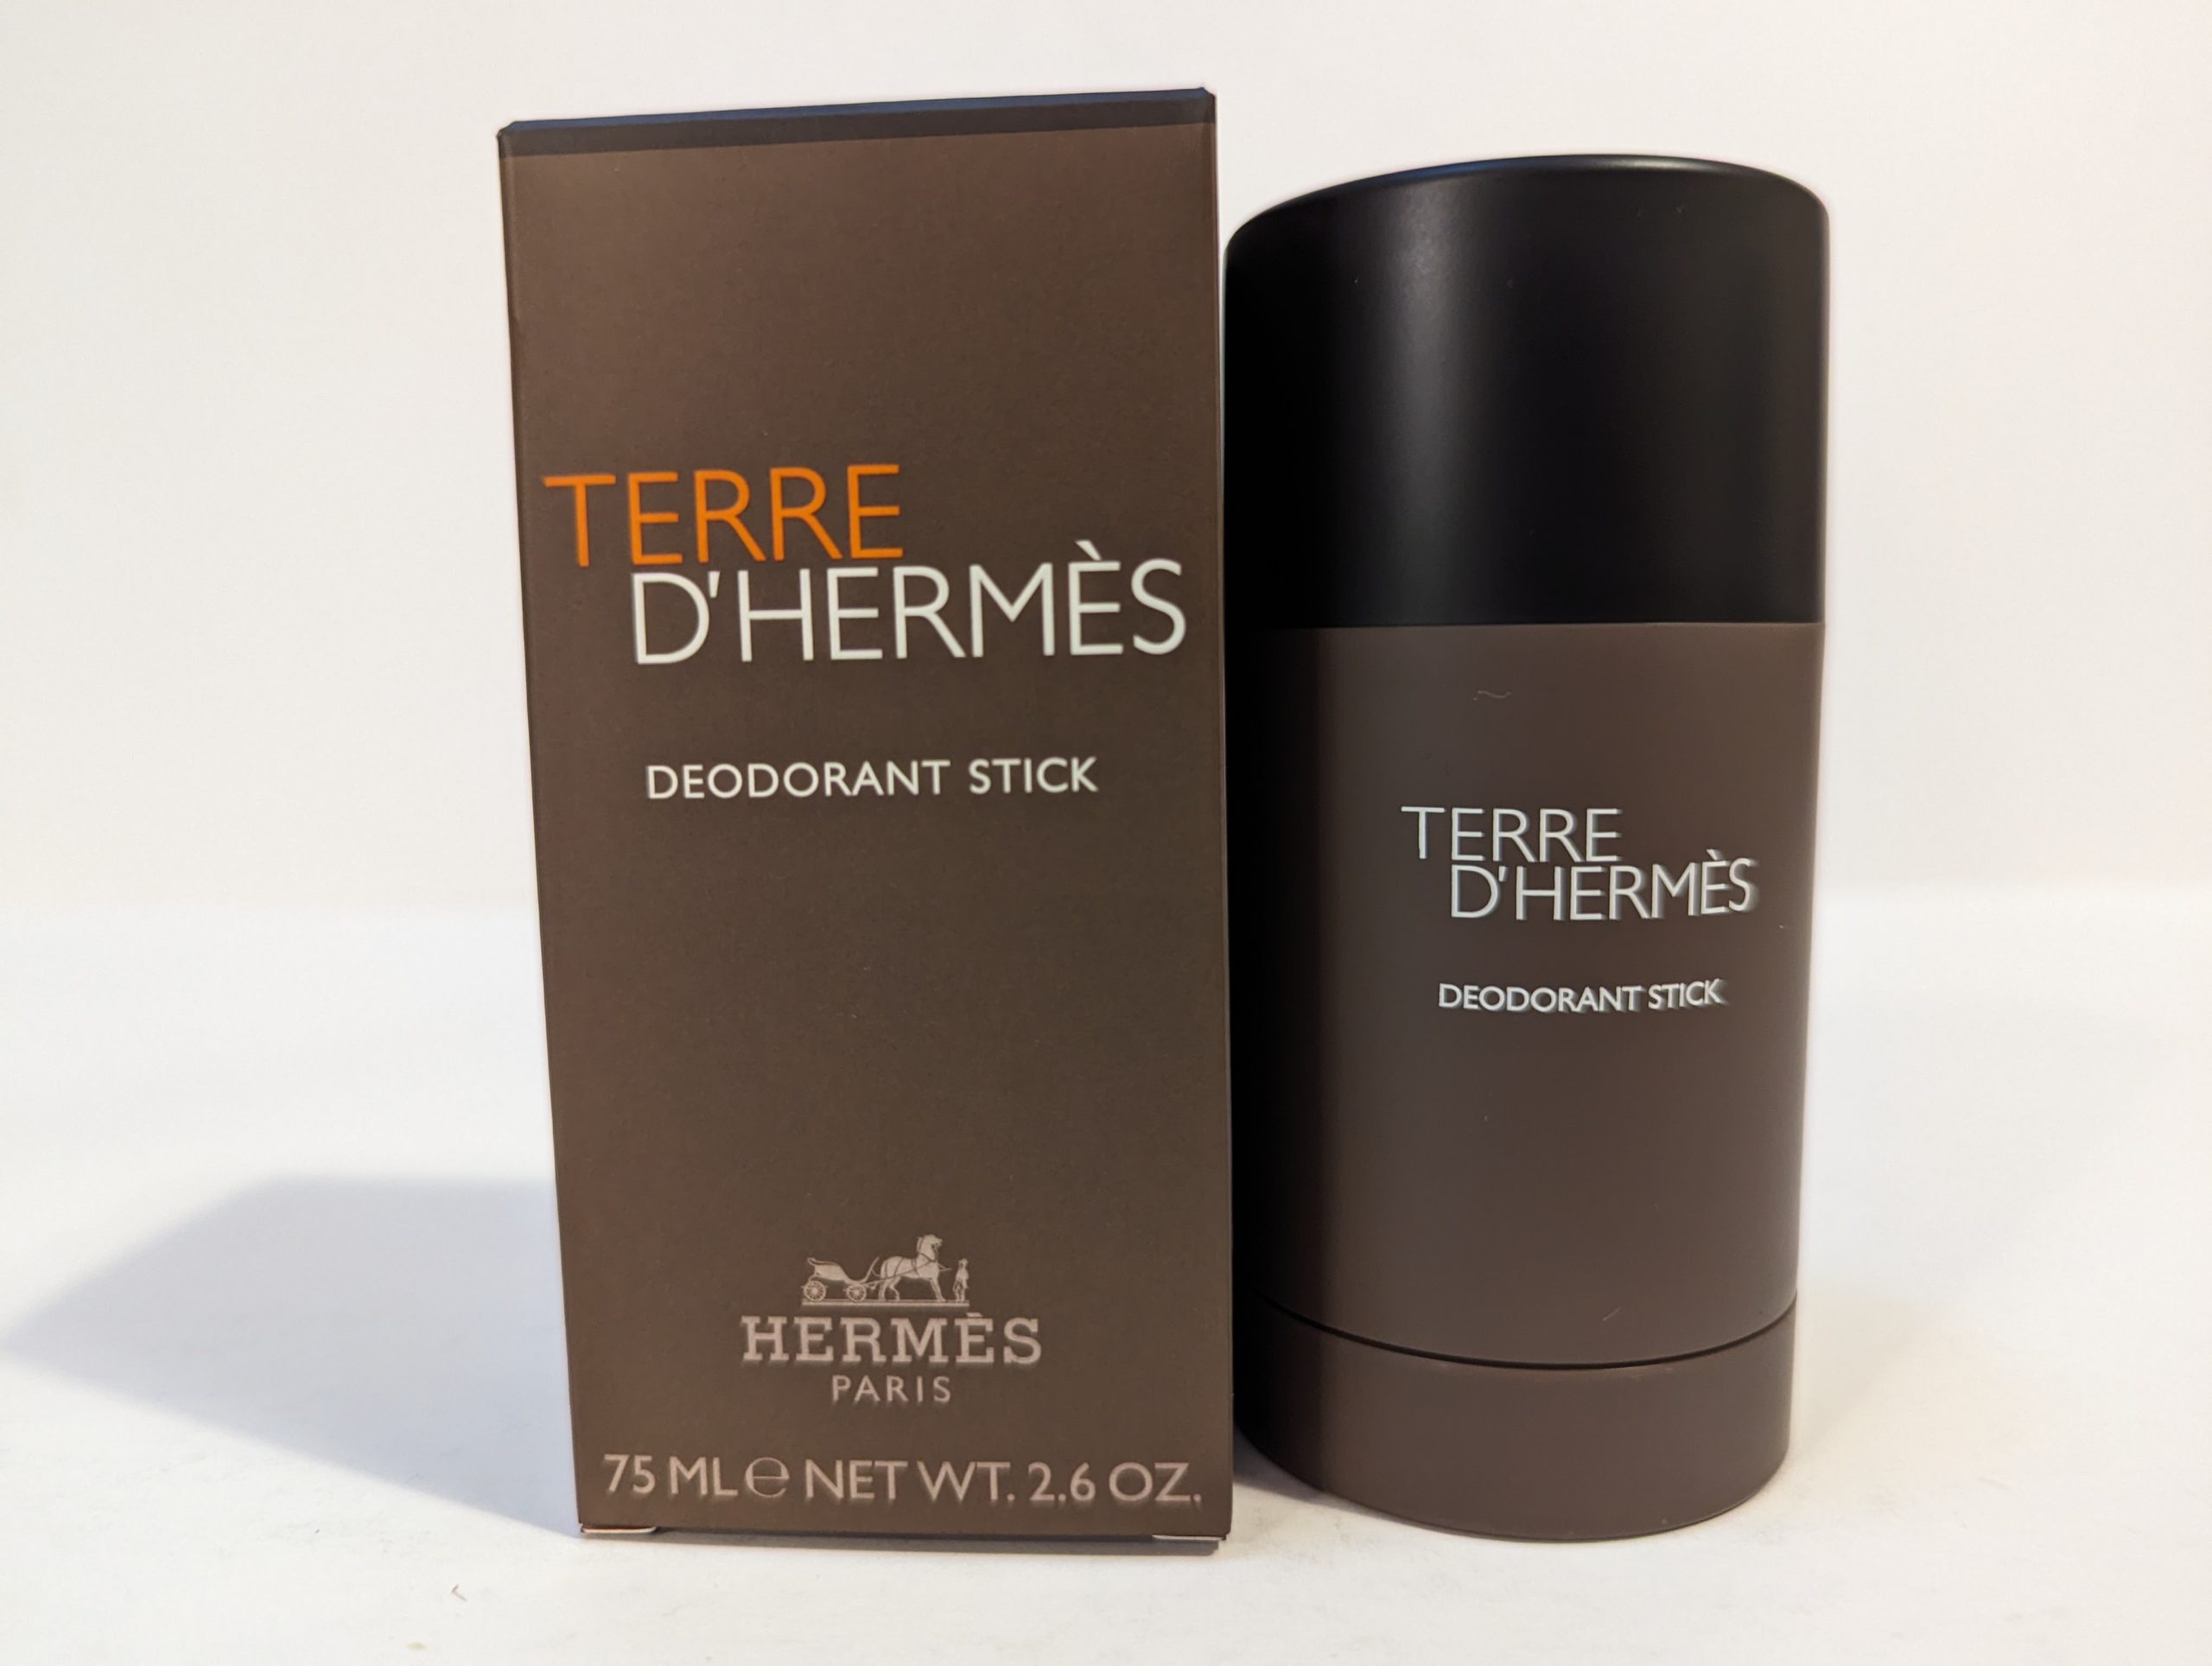 A Terre D’Hermès deodorant stick next to its matching box. The box and the deodorant stick have a brown color scheme with white text. The stick is 75 ml (2.6 oz).